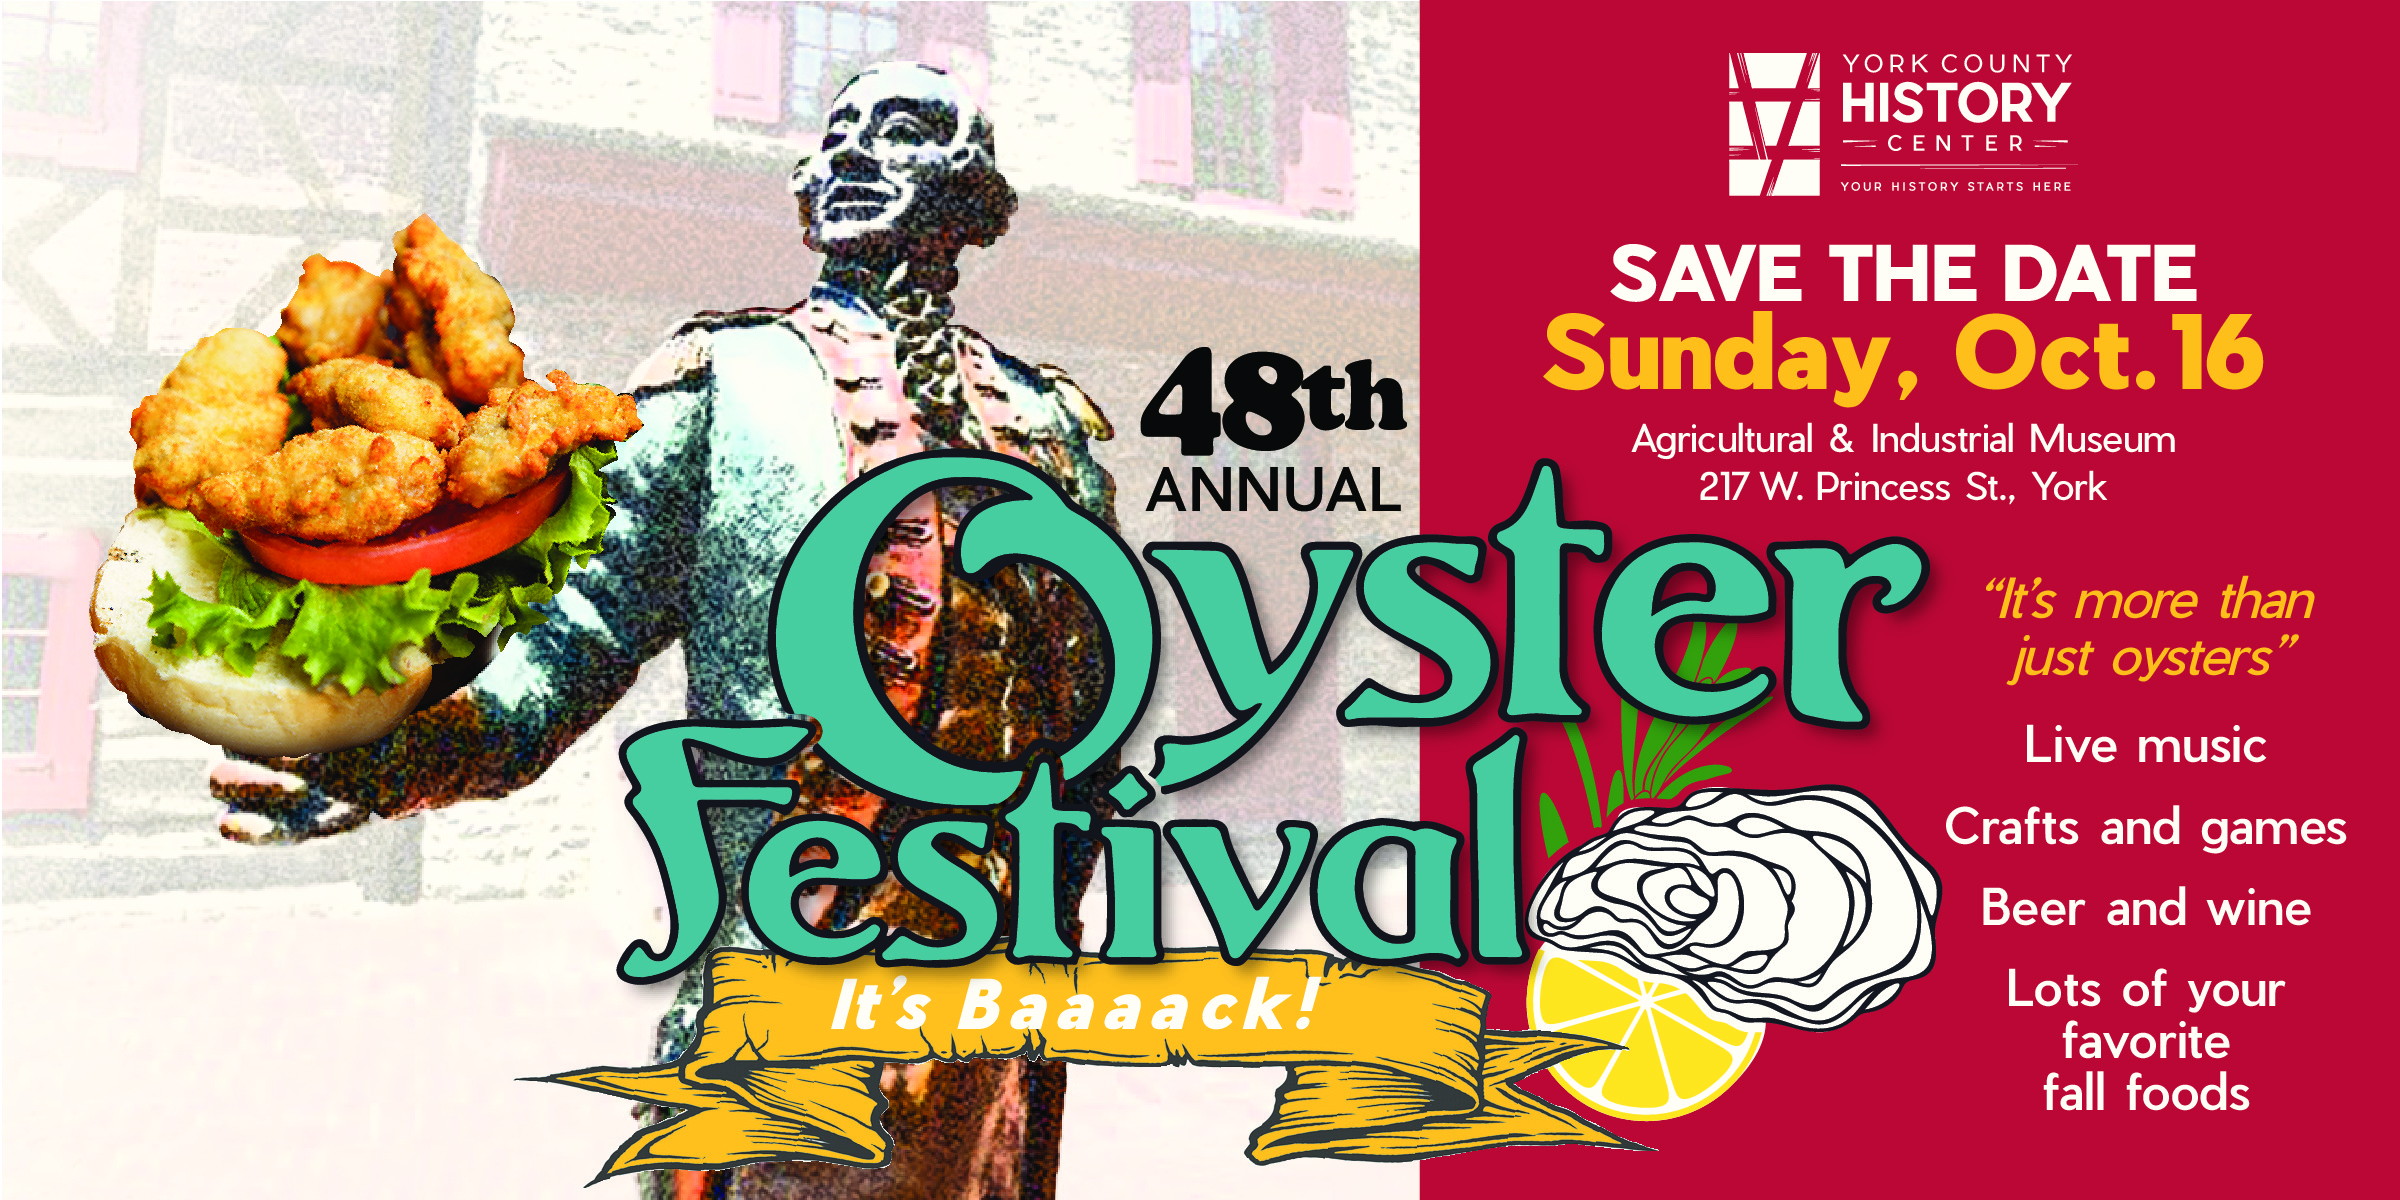 Oyster Festival, York County History Center at Agricultural and